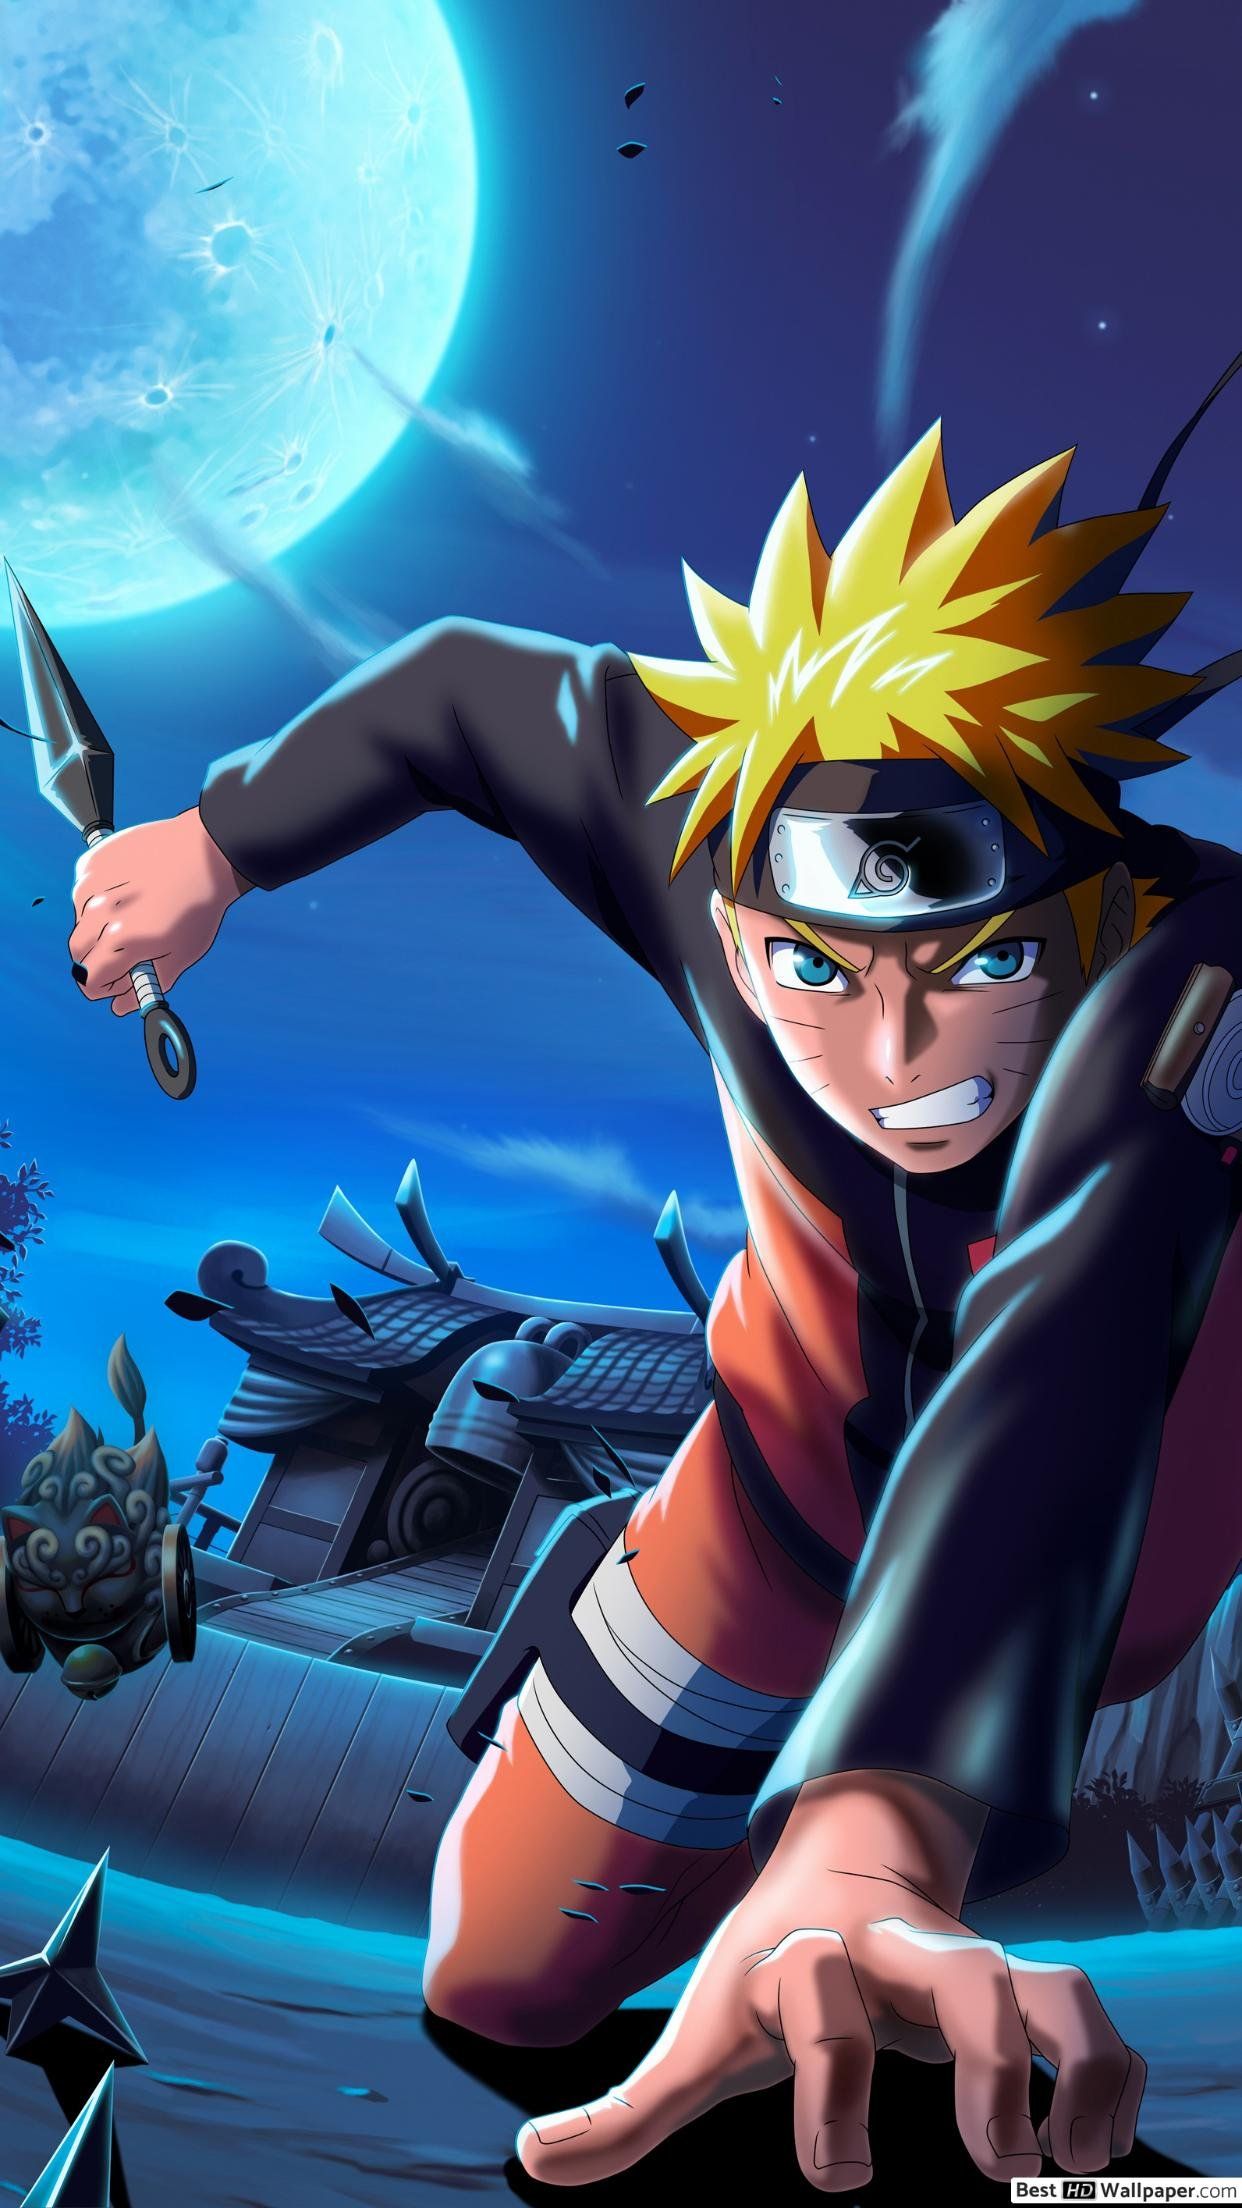 80+ Naruto Wallpapers - Ultimate Collection [Free Downloads]